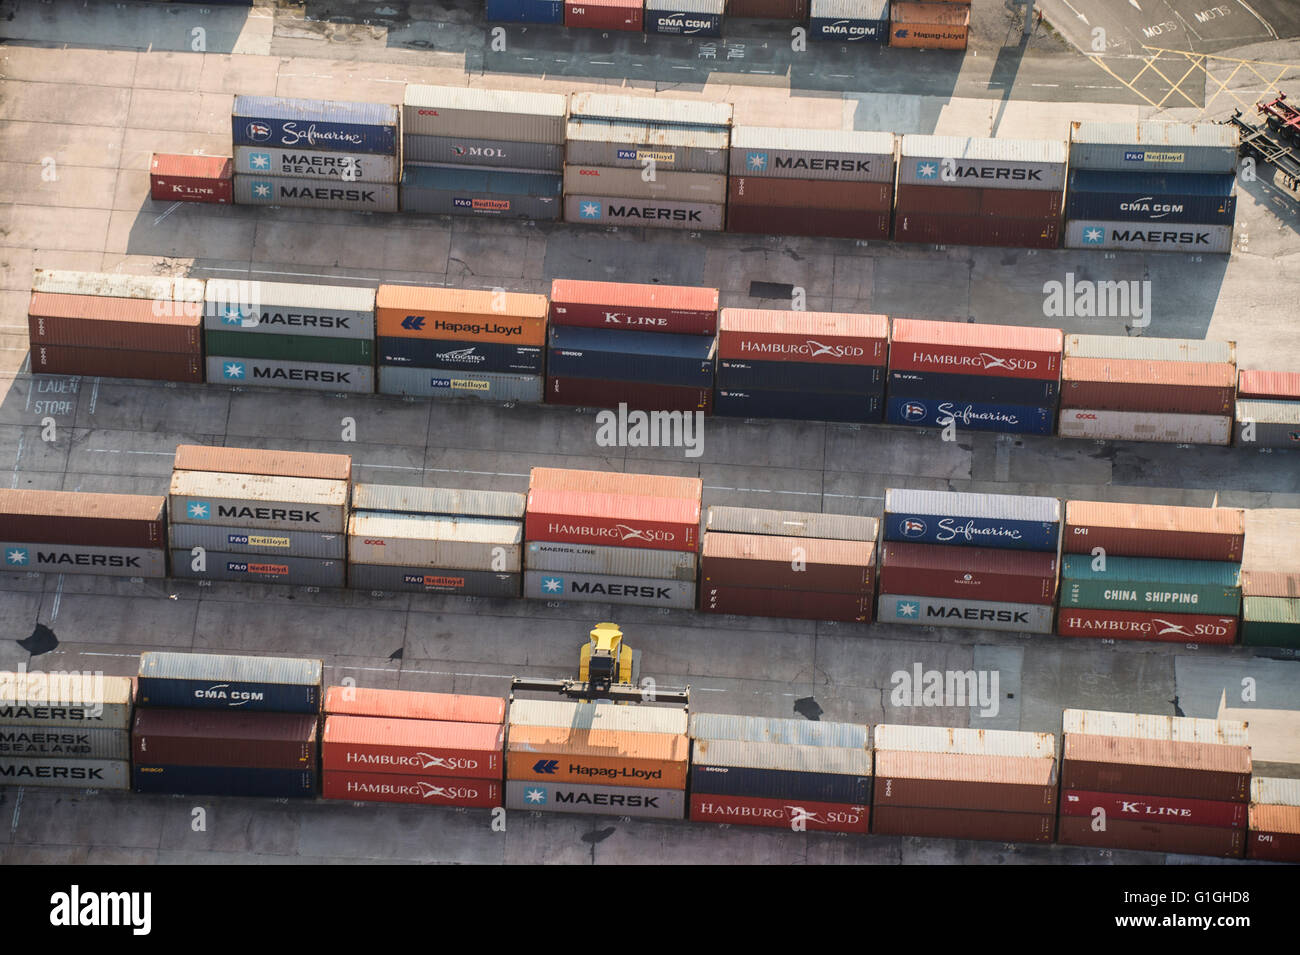 Aerial photo of container terminal with rail traffic Stock Photo